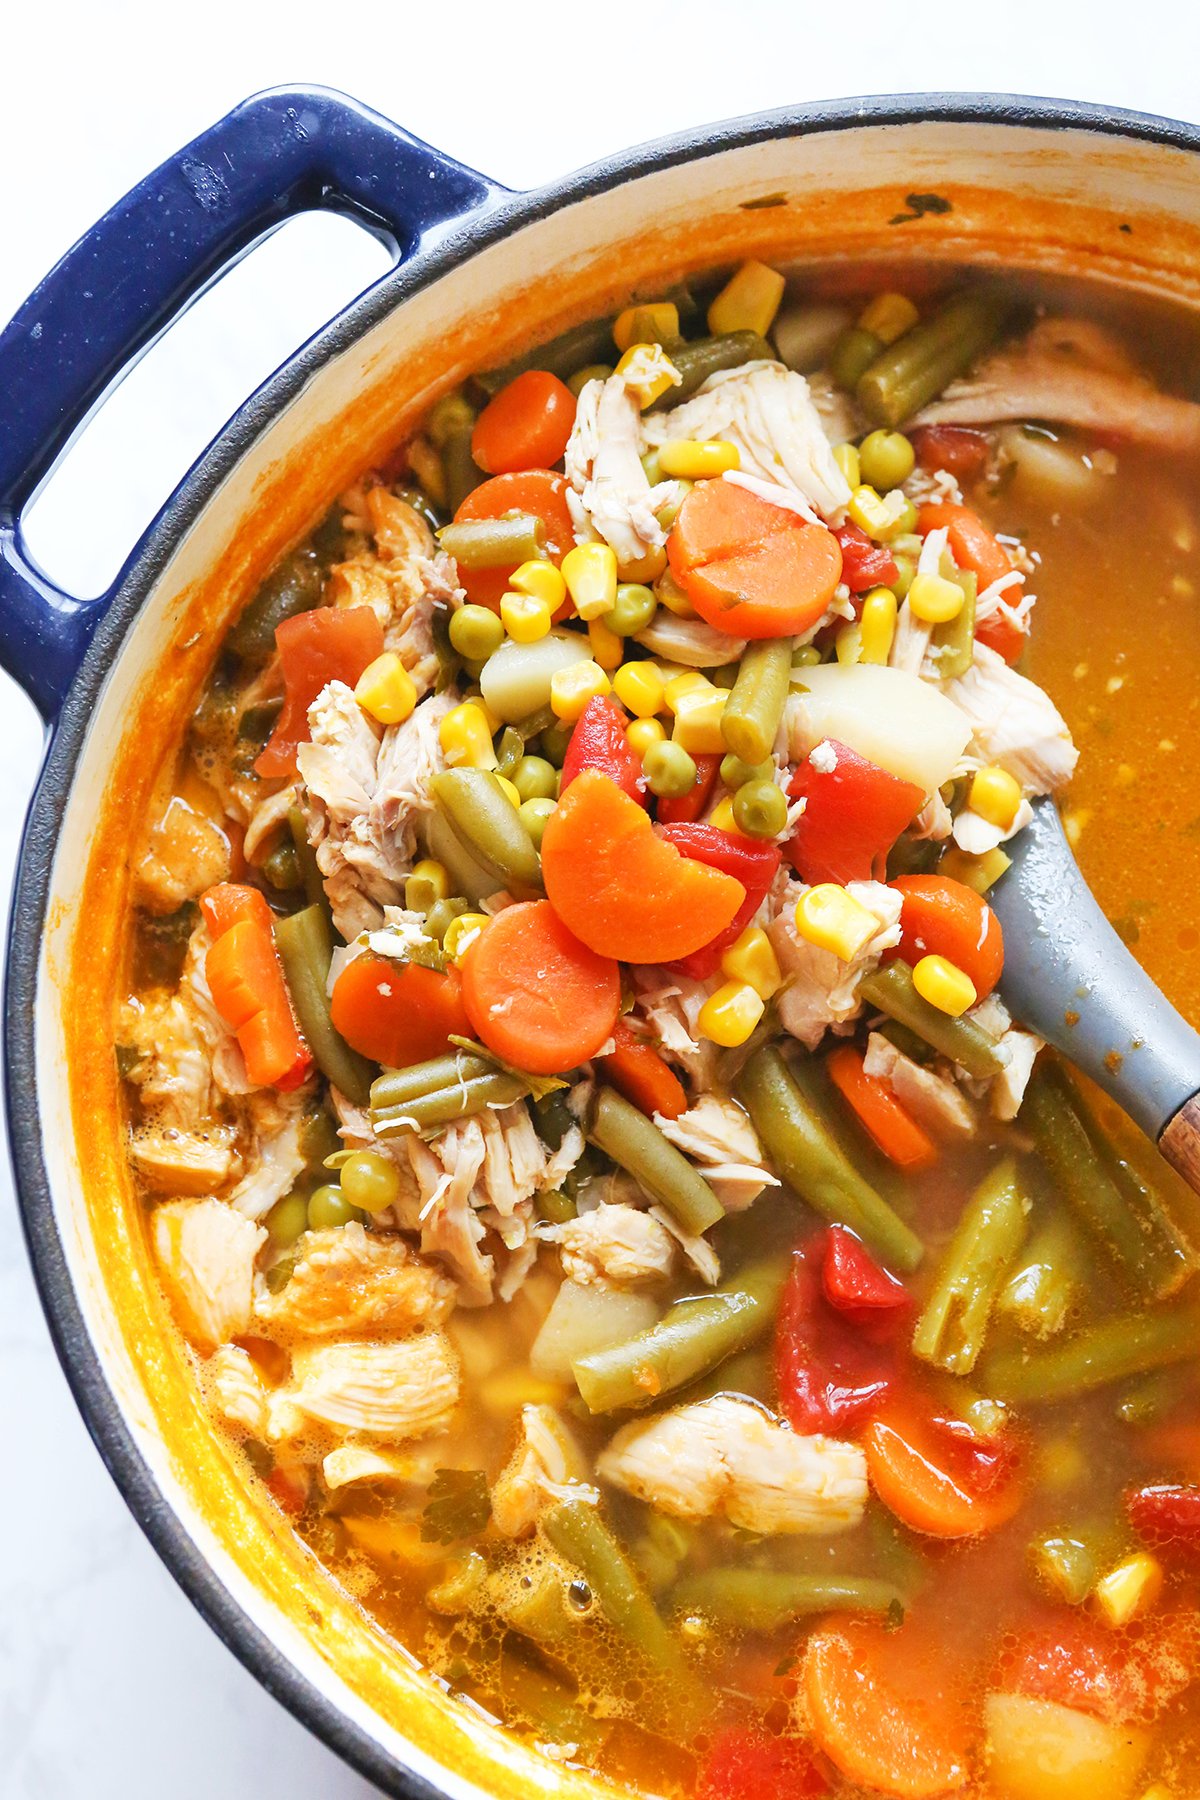 Dutch oven filled with soup that has tons of veggies and chicken and broth.